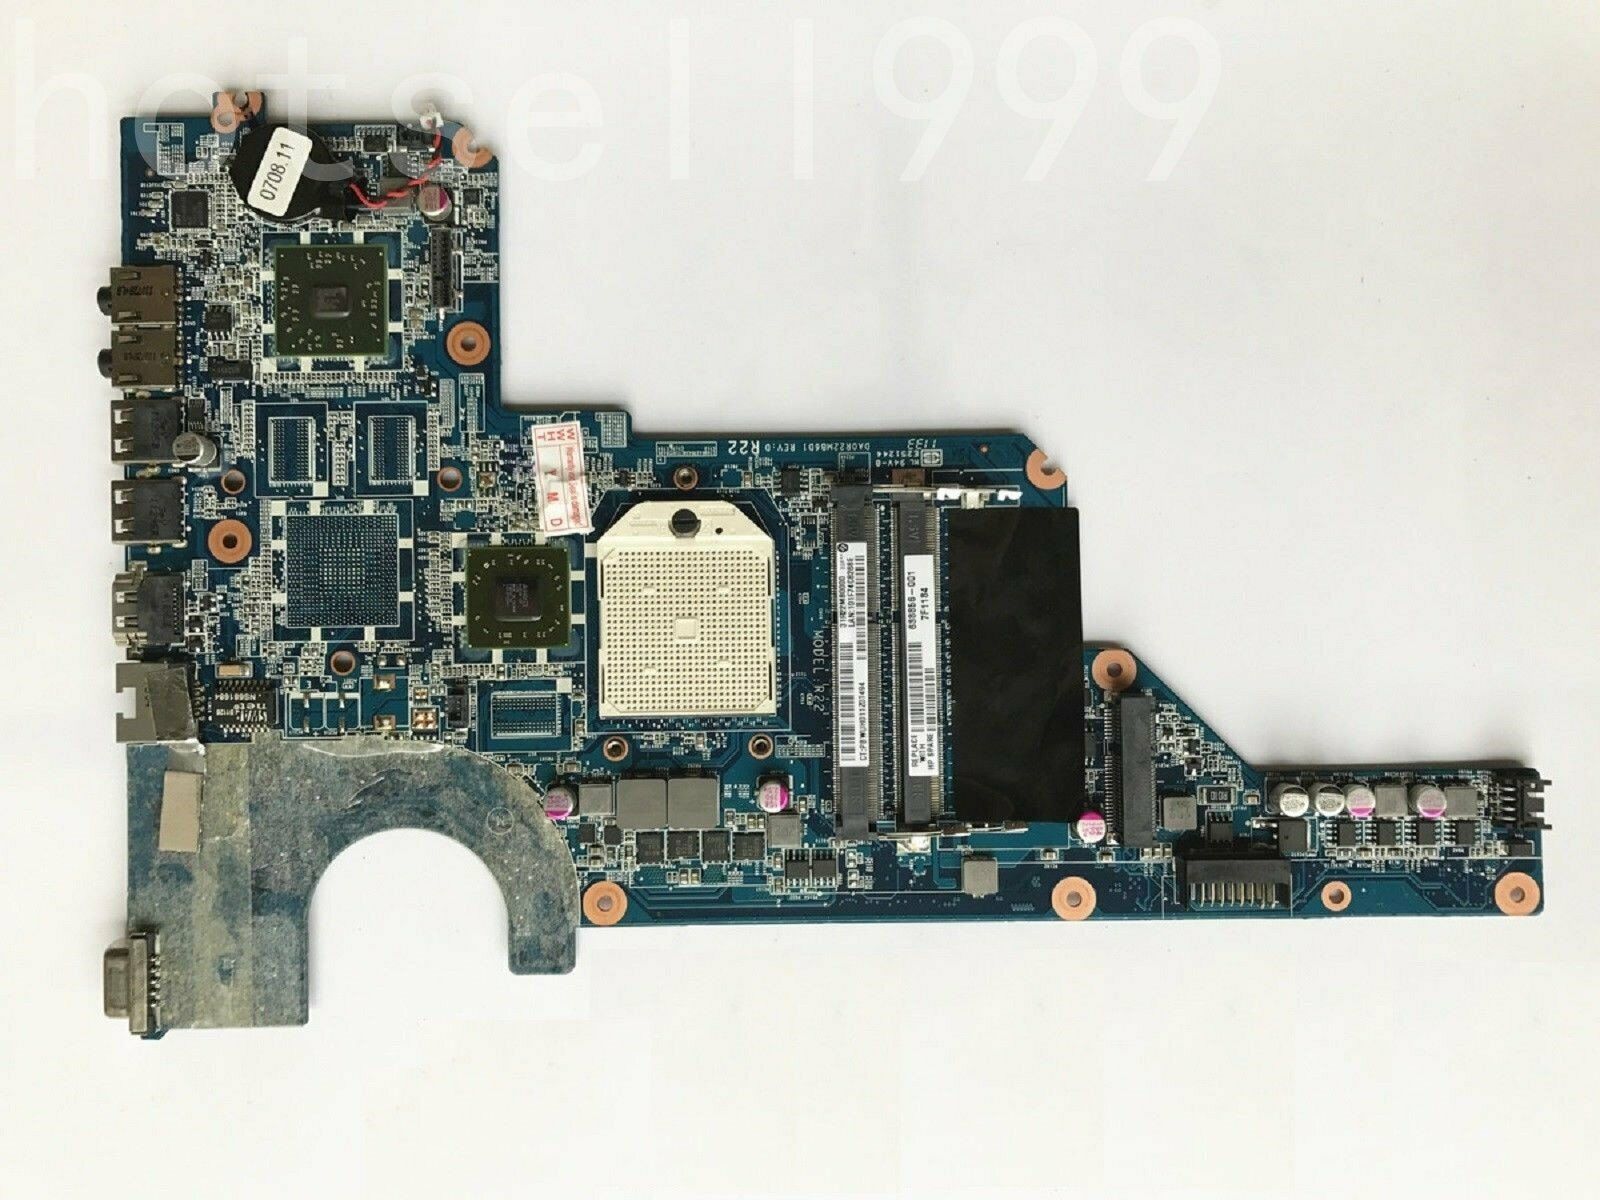 FOR HP G4-1000 G6 G7 Laptop Motherboard 638856-001 DAOR22MB6D0 Tested Brand: HP Number of Memory Slots: 2